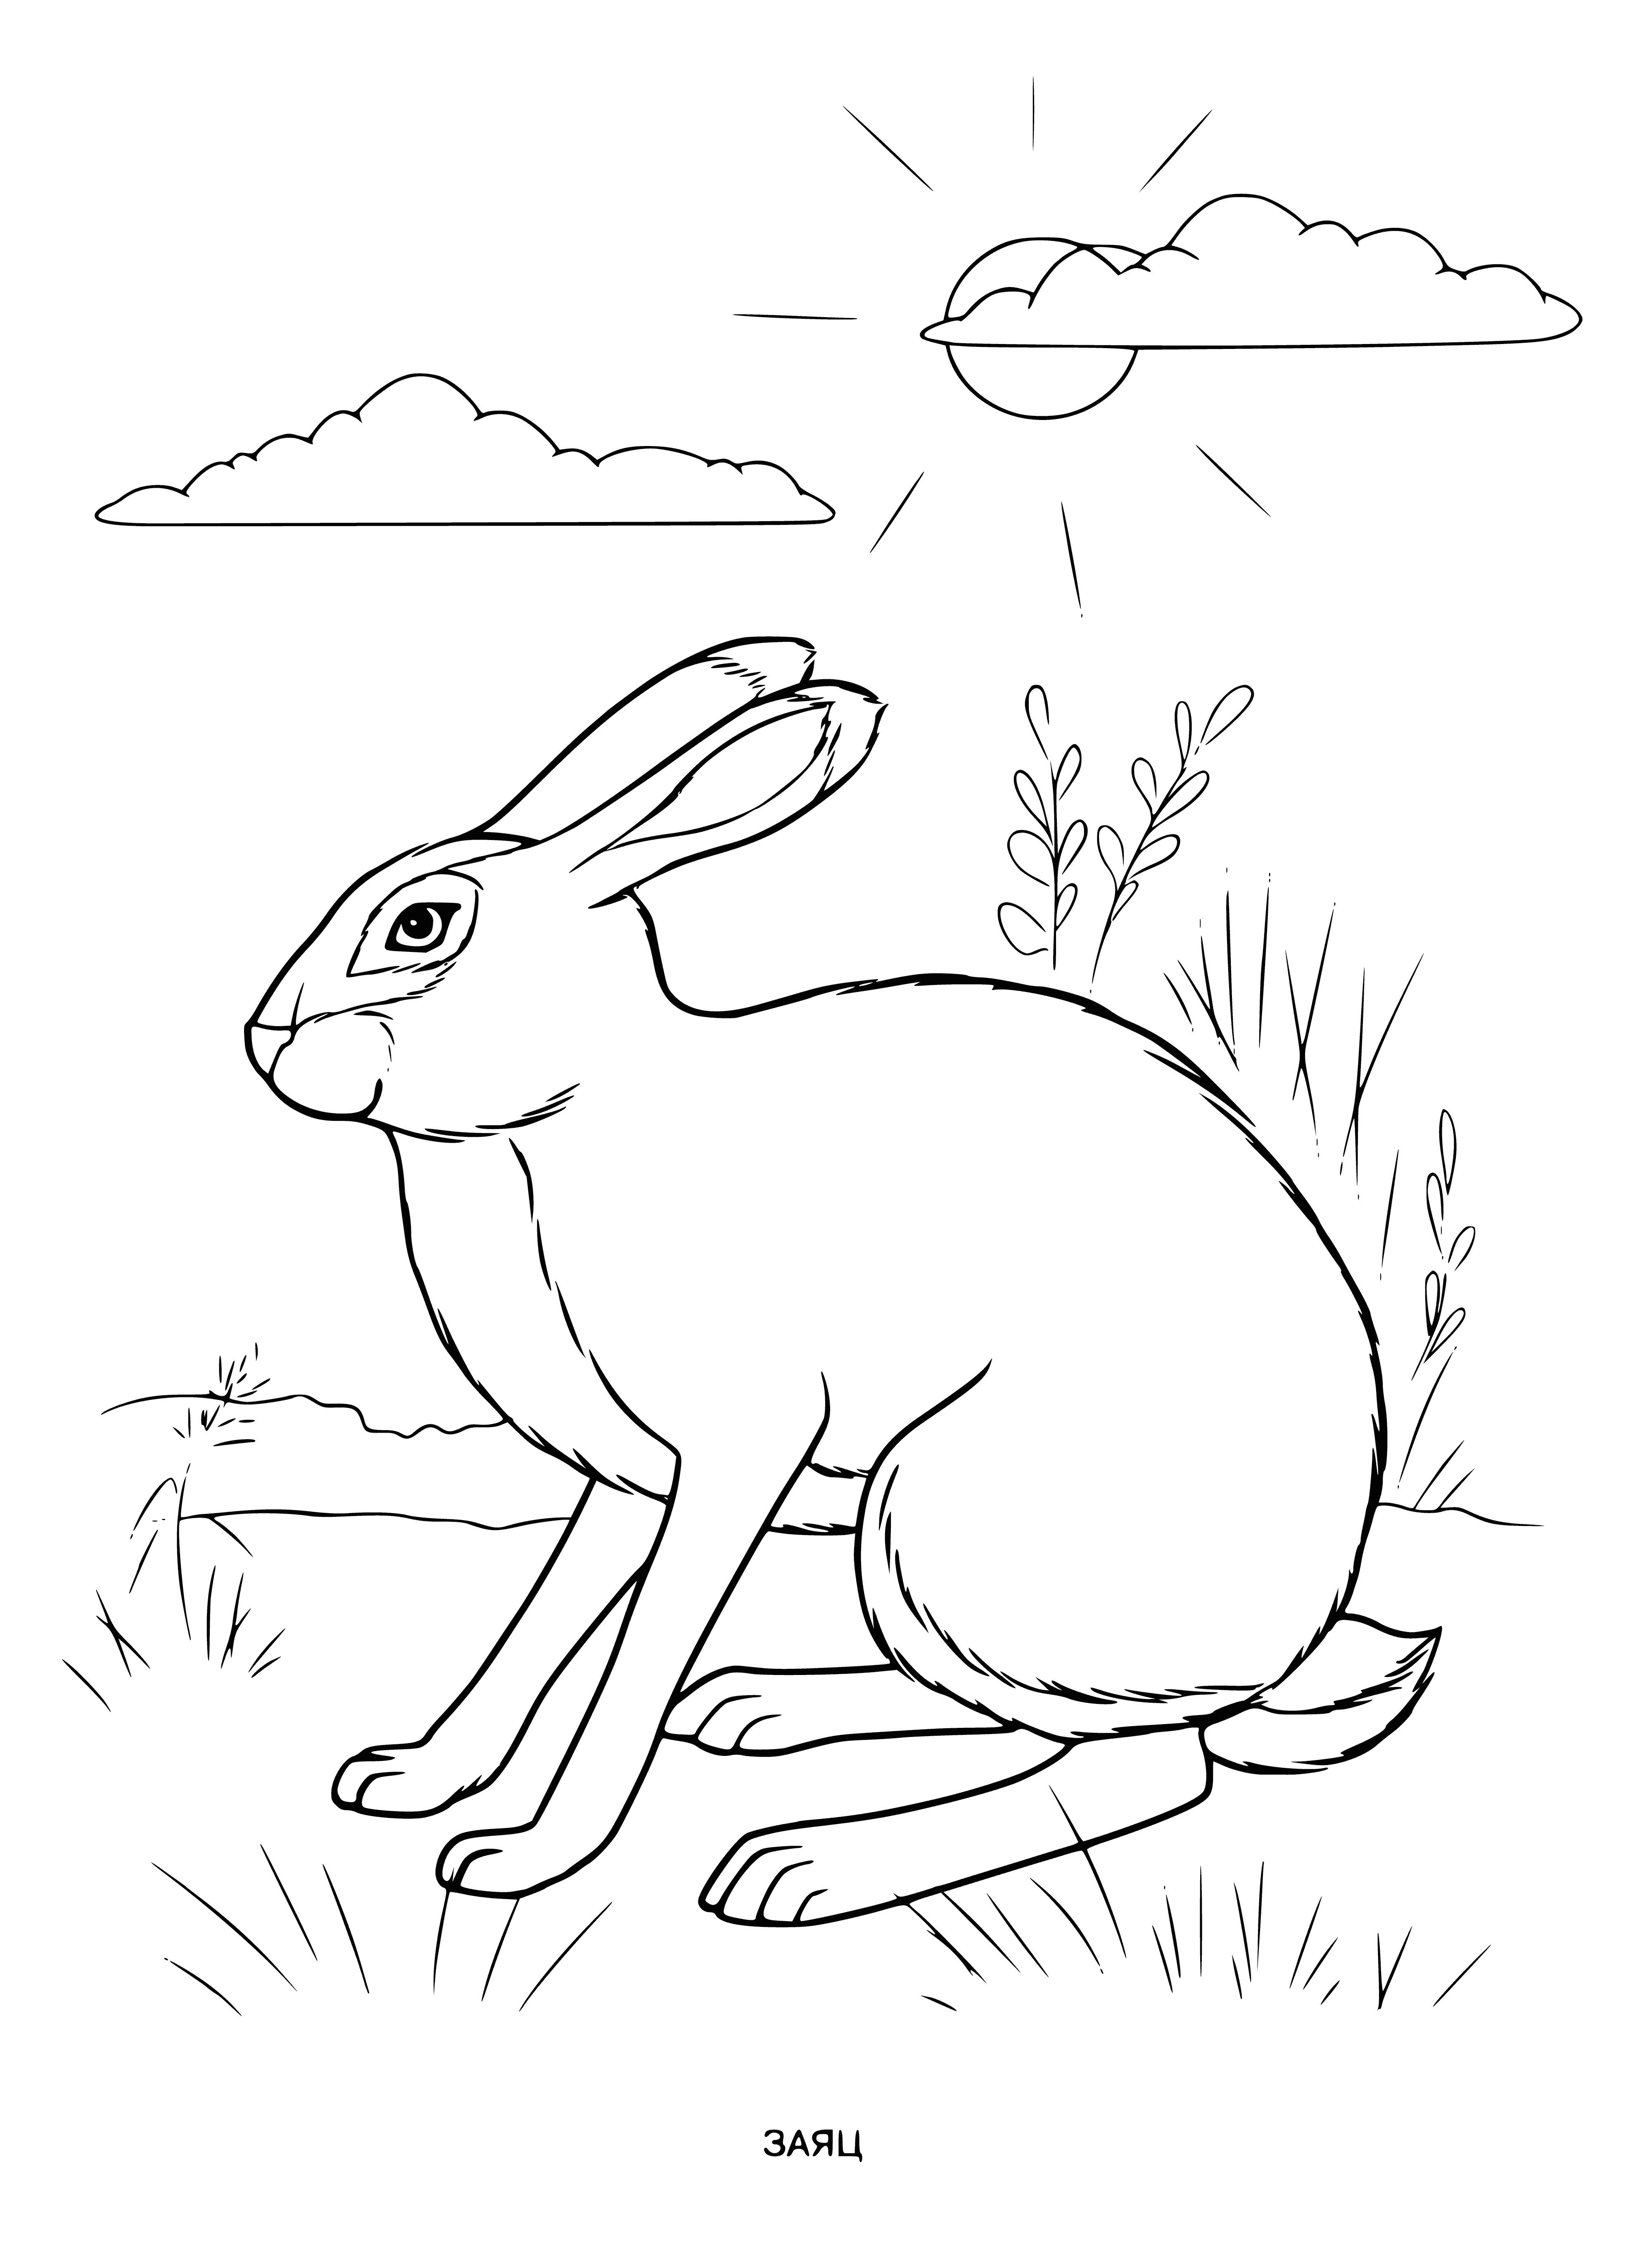 coloring page: A wild hare is shown in a coloring page. Brown and white, long ears, standing on hind legs.